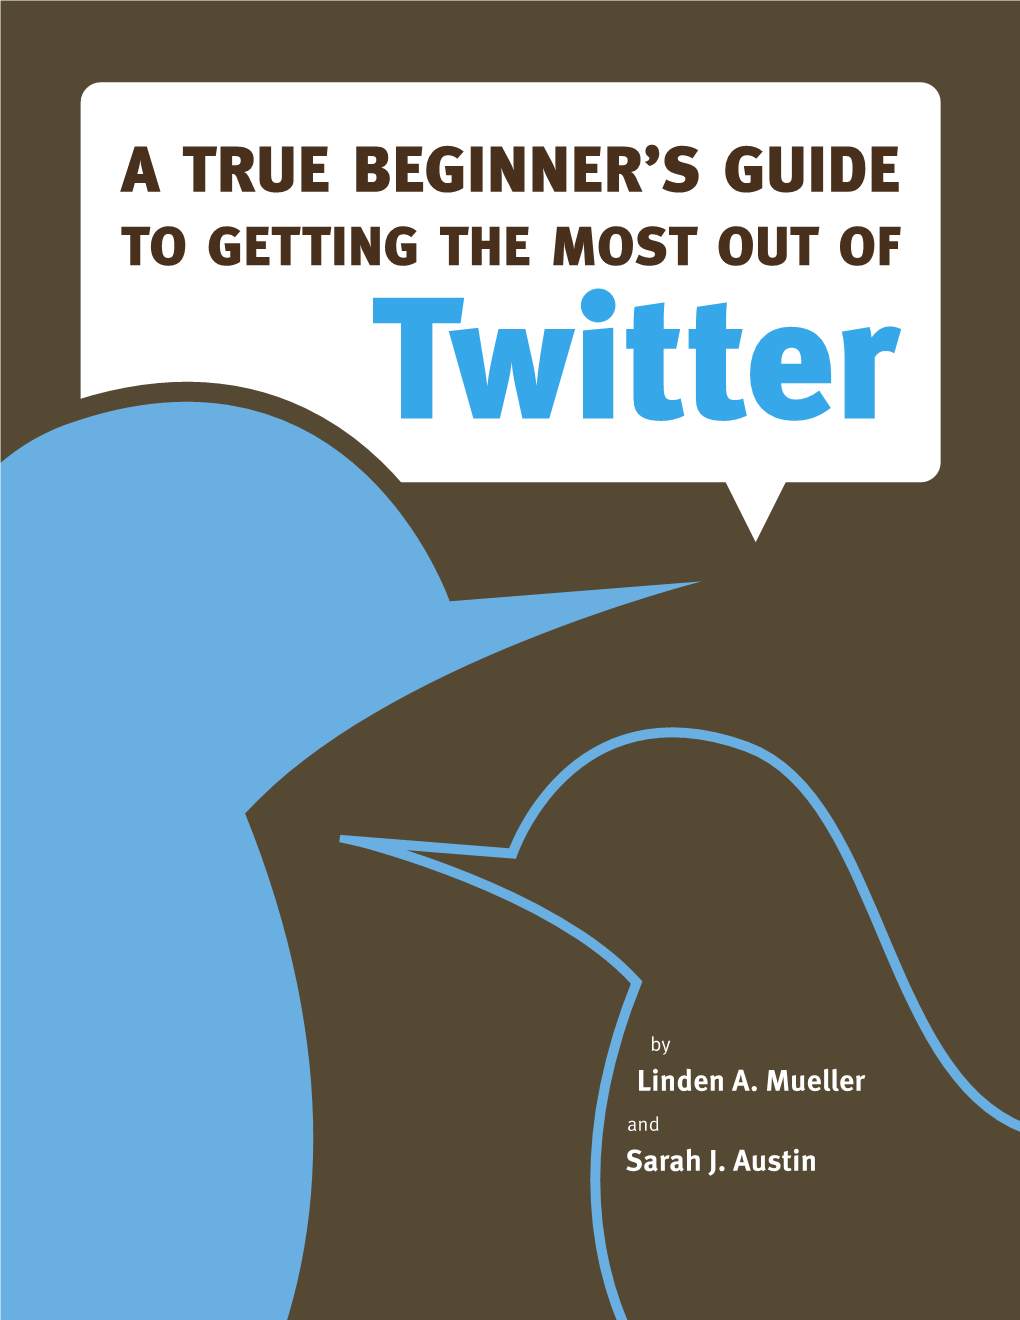 A True Beginner's Guide to Getting the Most out of Twitter